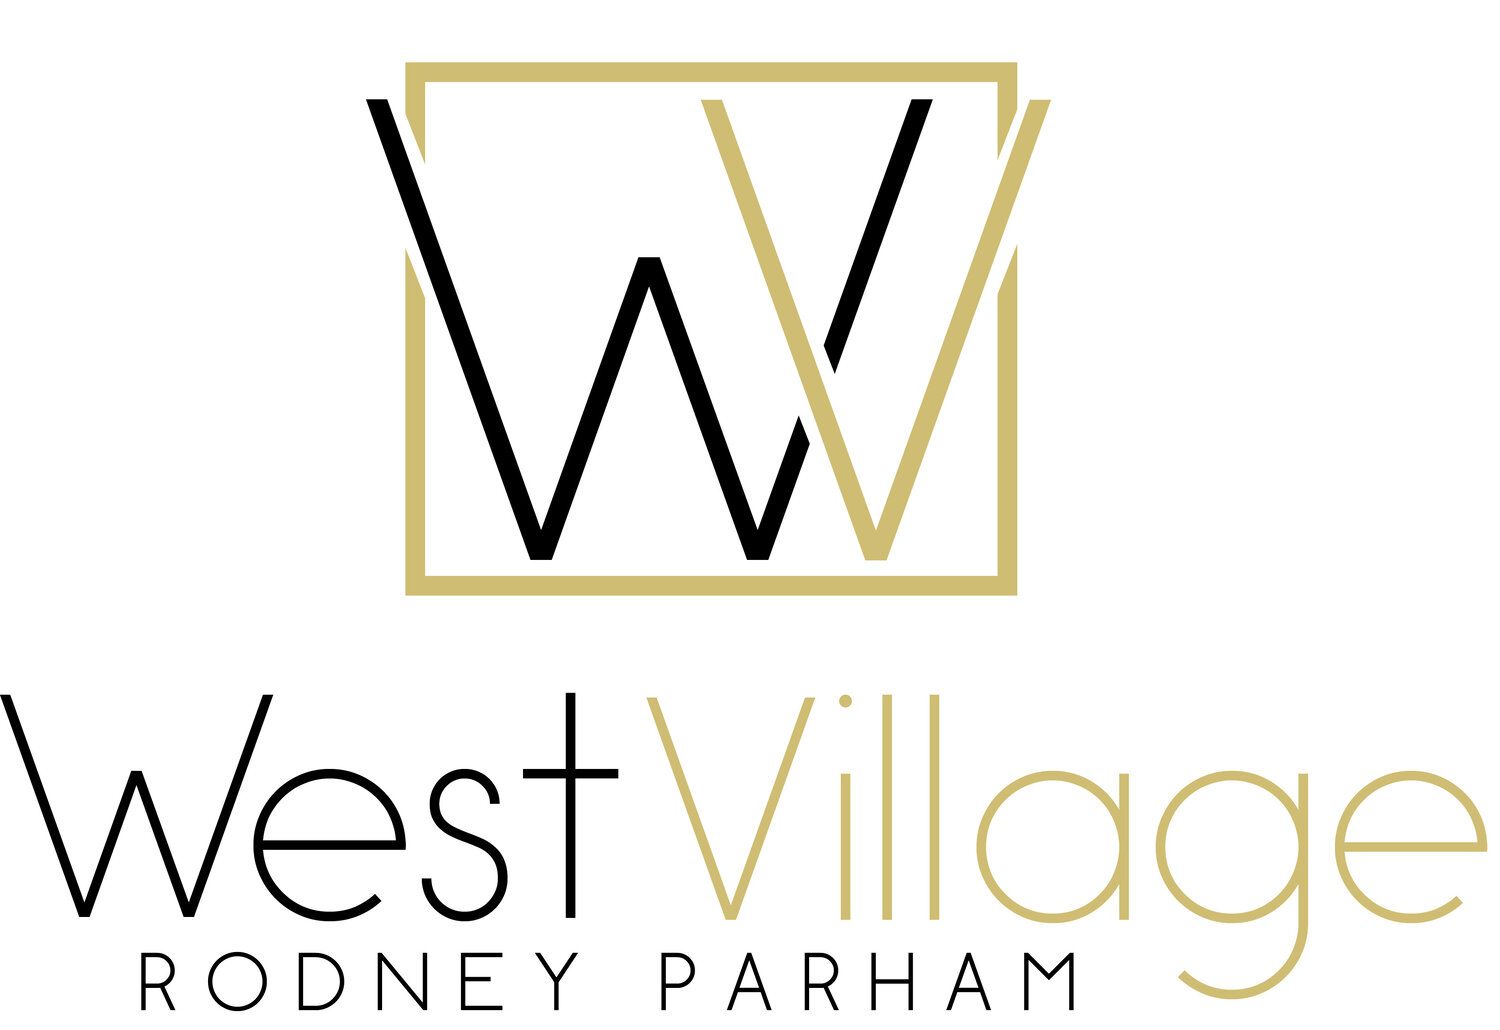 the logo for west village rodney parham is black and gold .